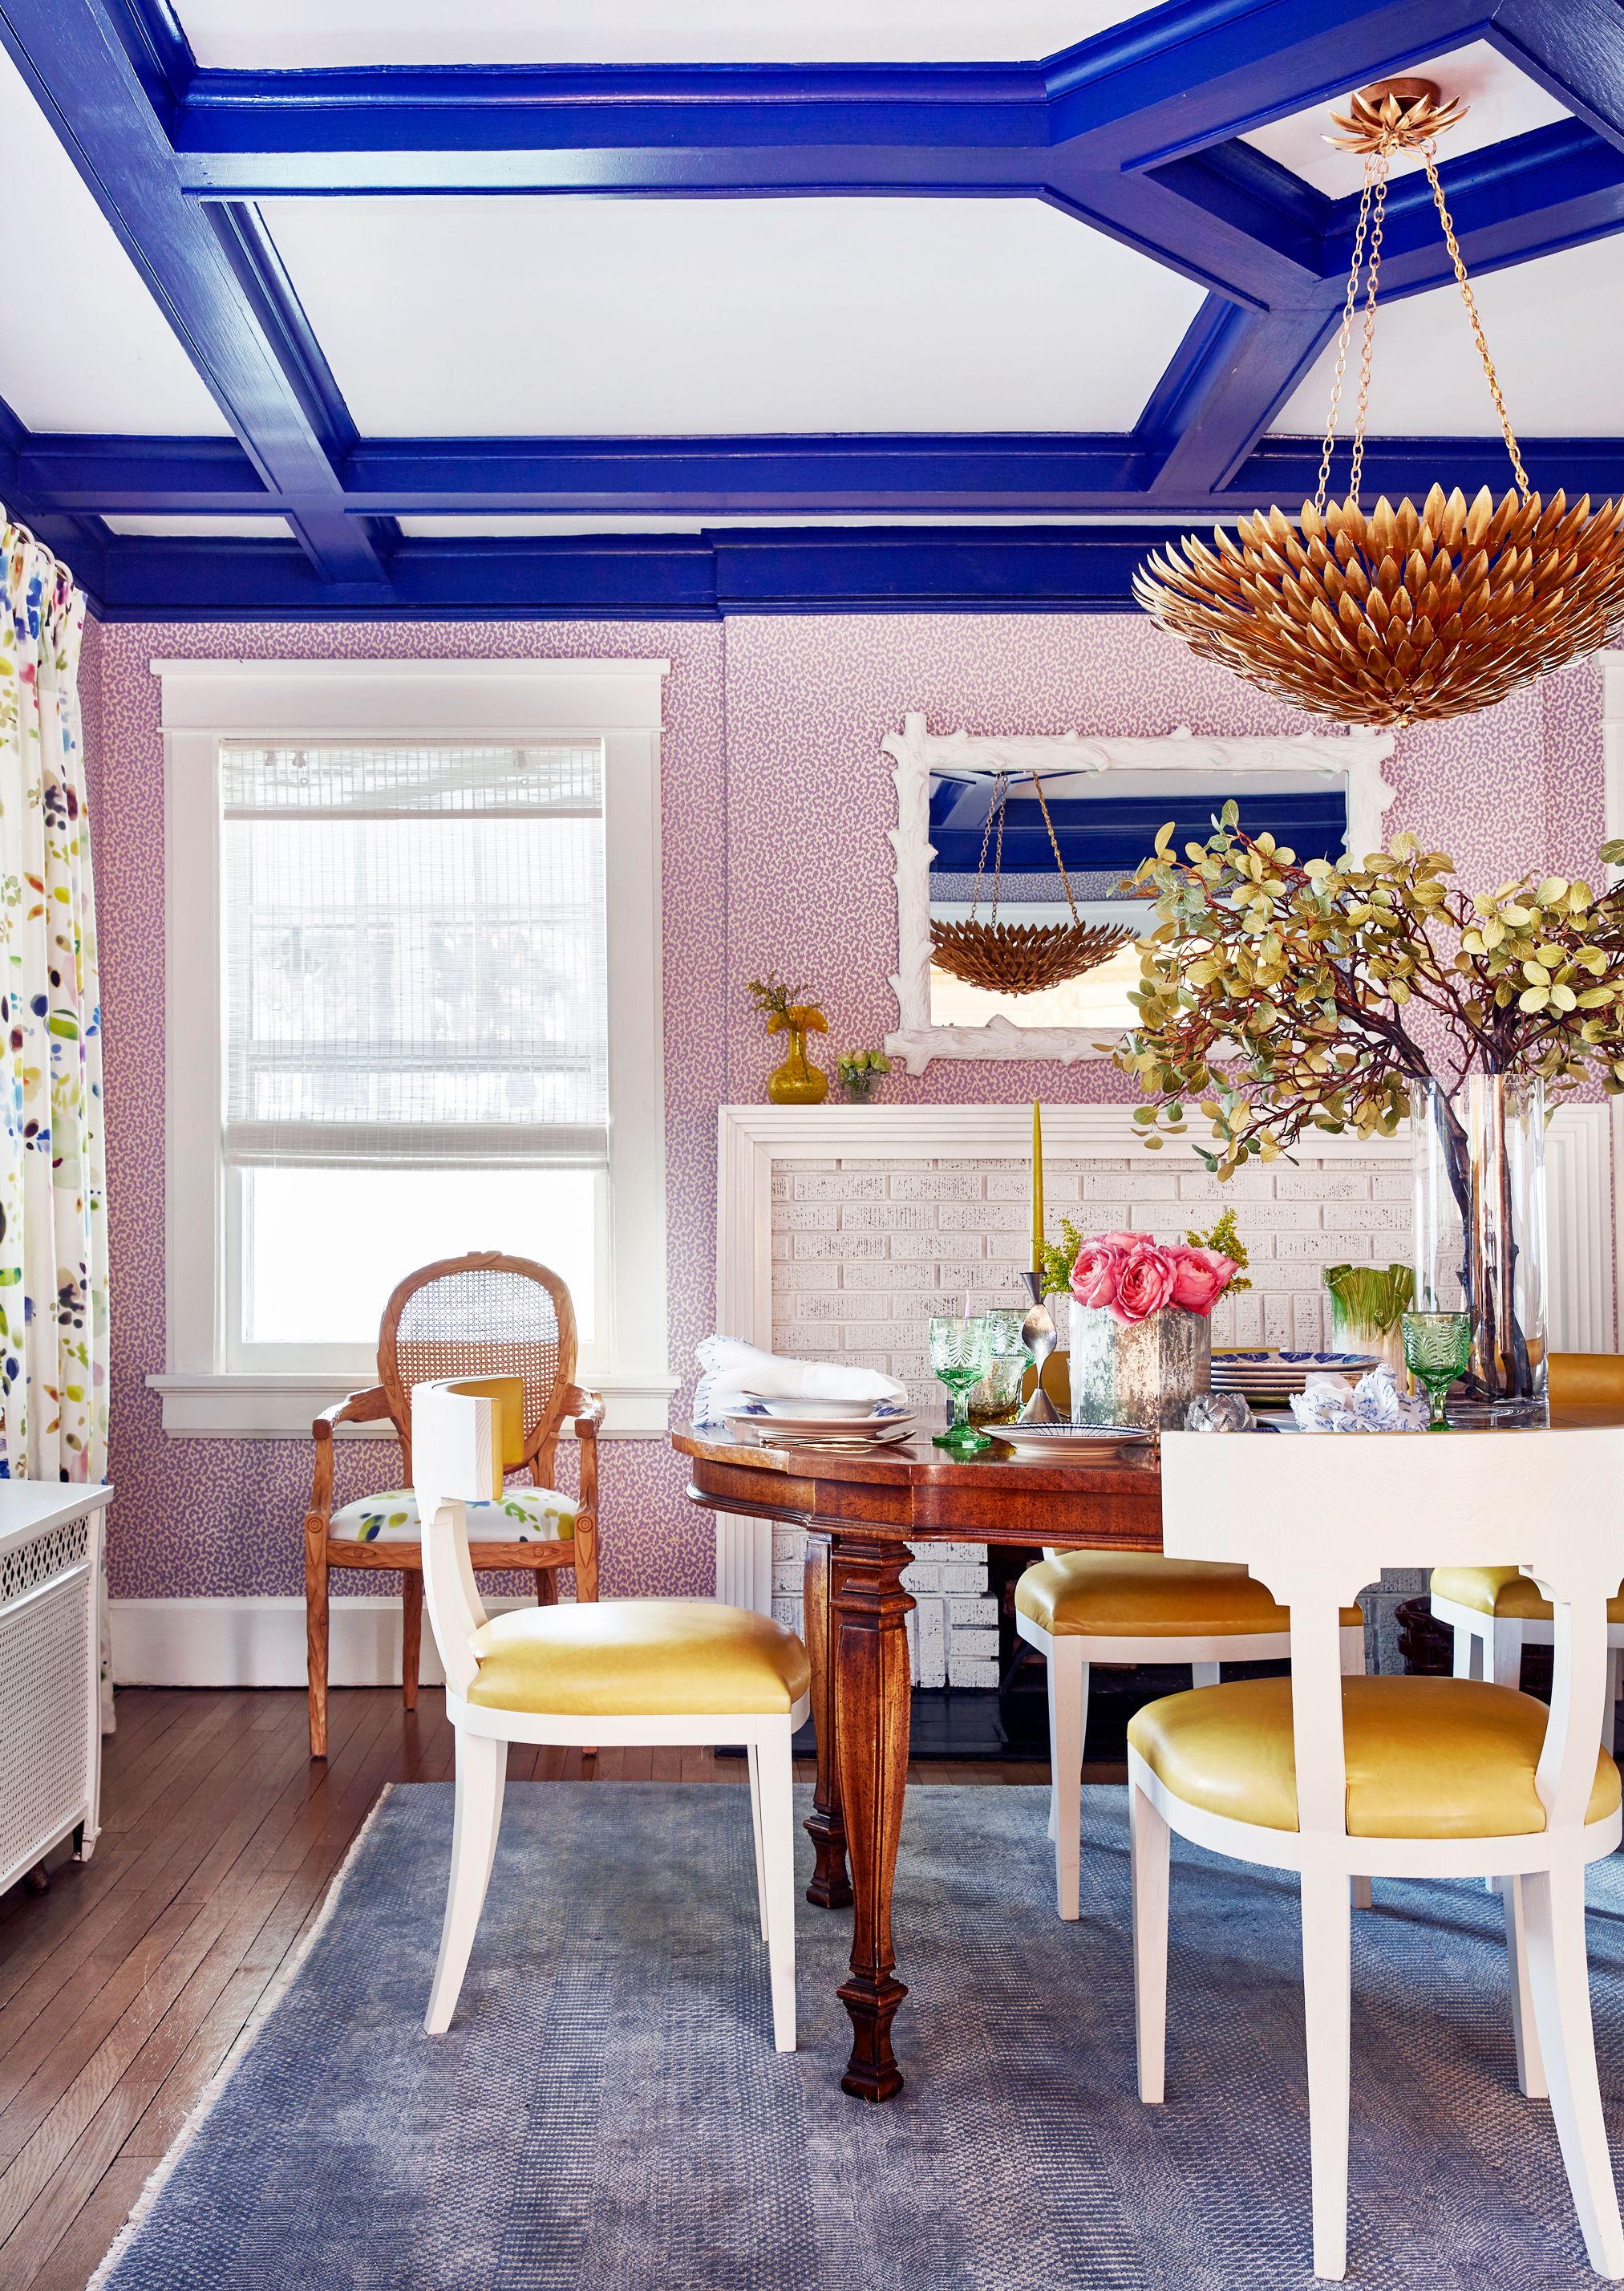 20 Painted Ceilings That Make The